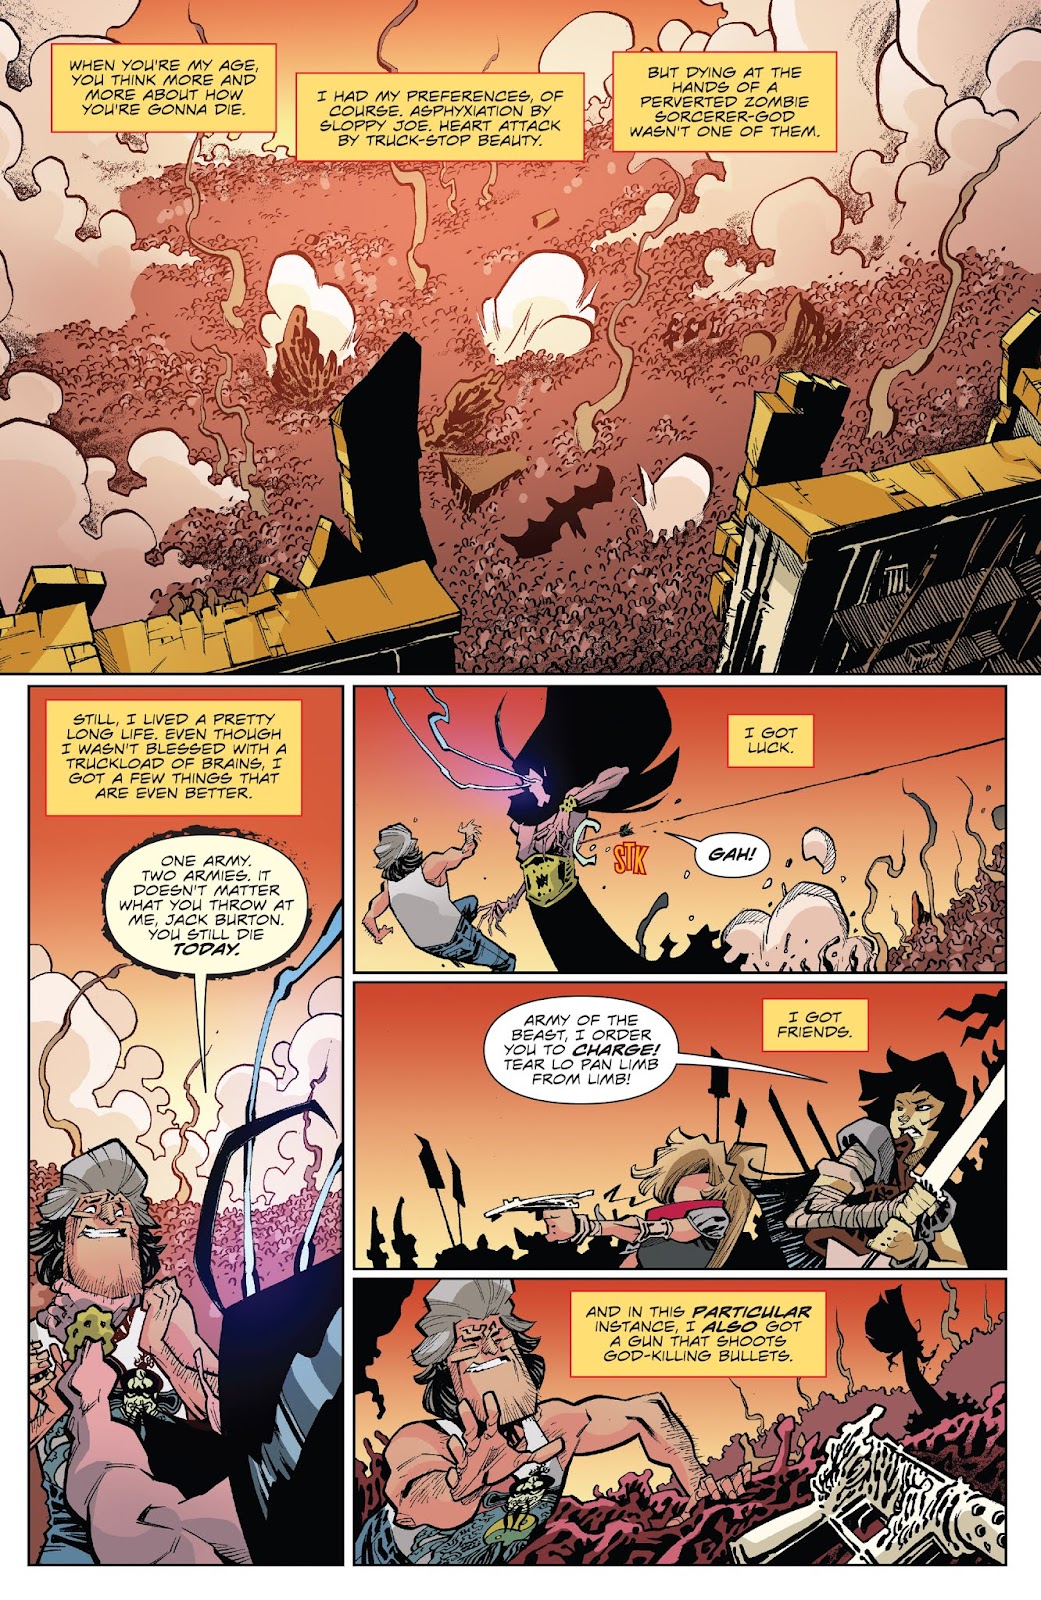 Big Trouble in Little China: Old Man Jack issue 12 - Page 3